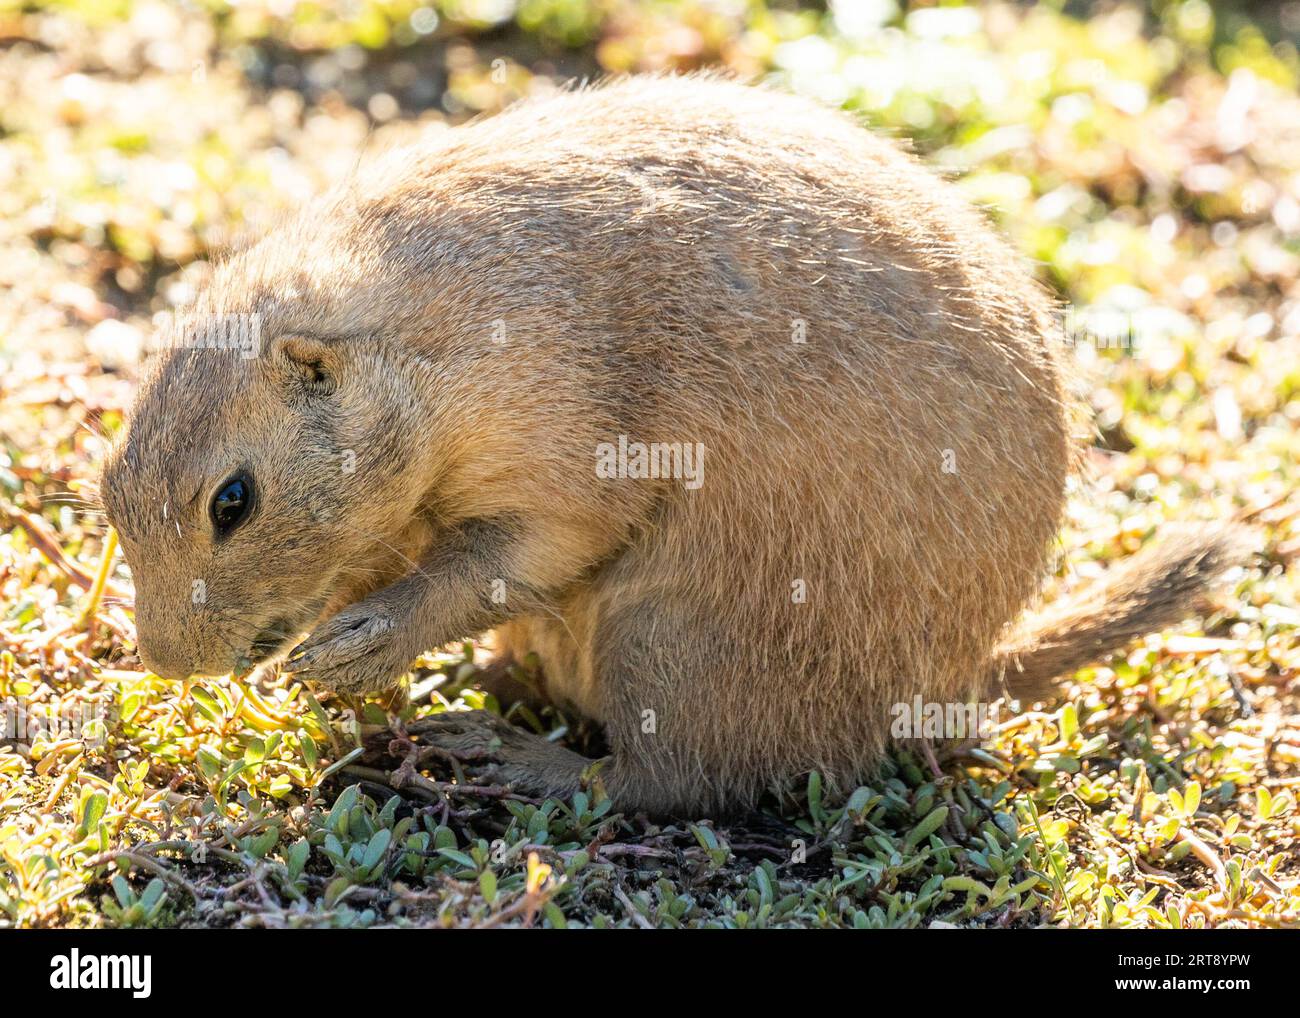 Charming Black-tailed Prairie Dogs, Cynomys ludovicianus, native to Mexico, thriving in their grassy habitats. Stock Photo